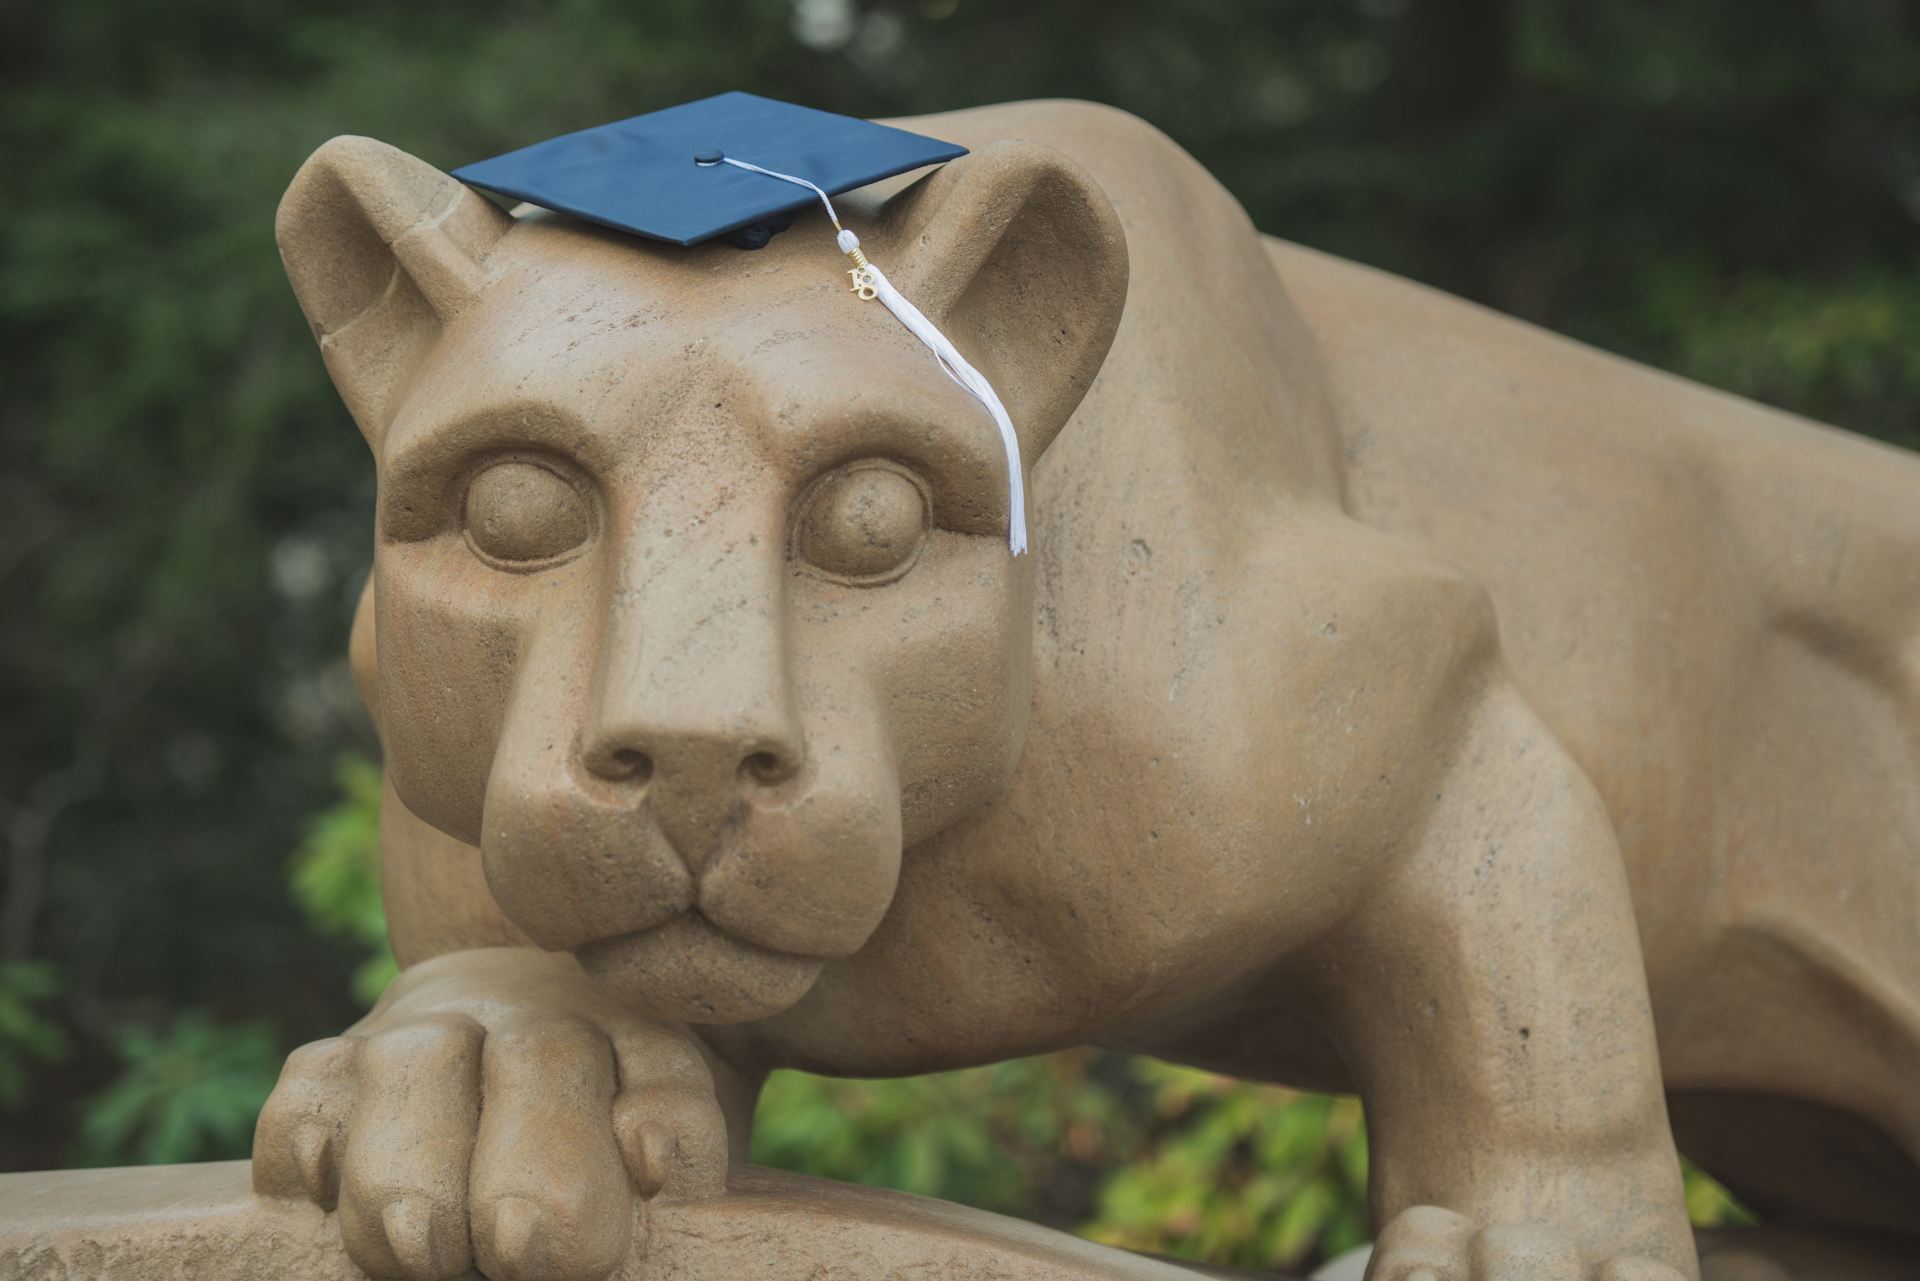 Nittany Lion statue wearing a graduation cap